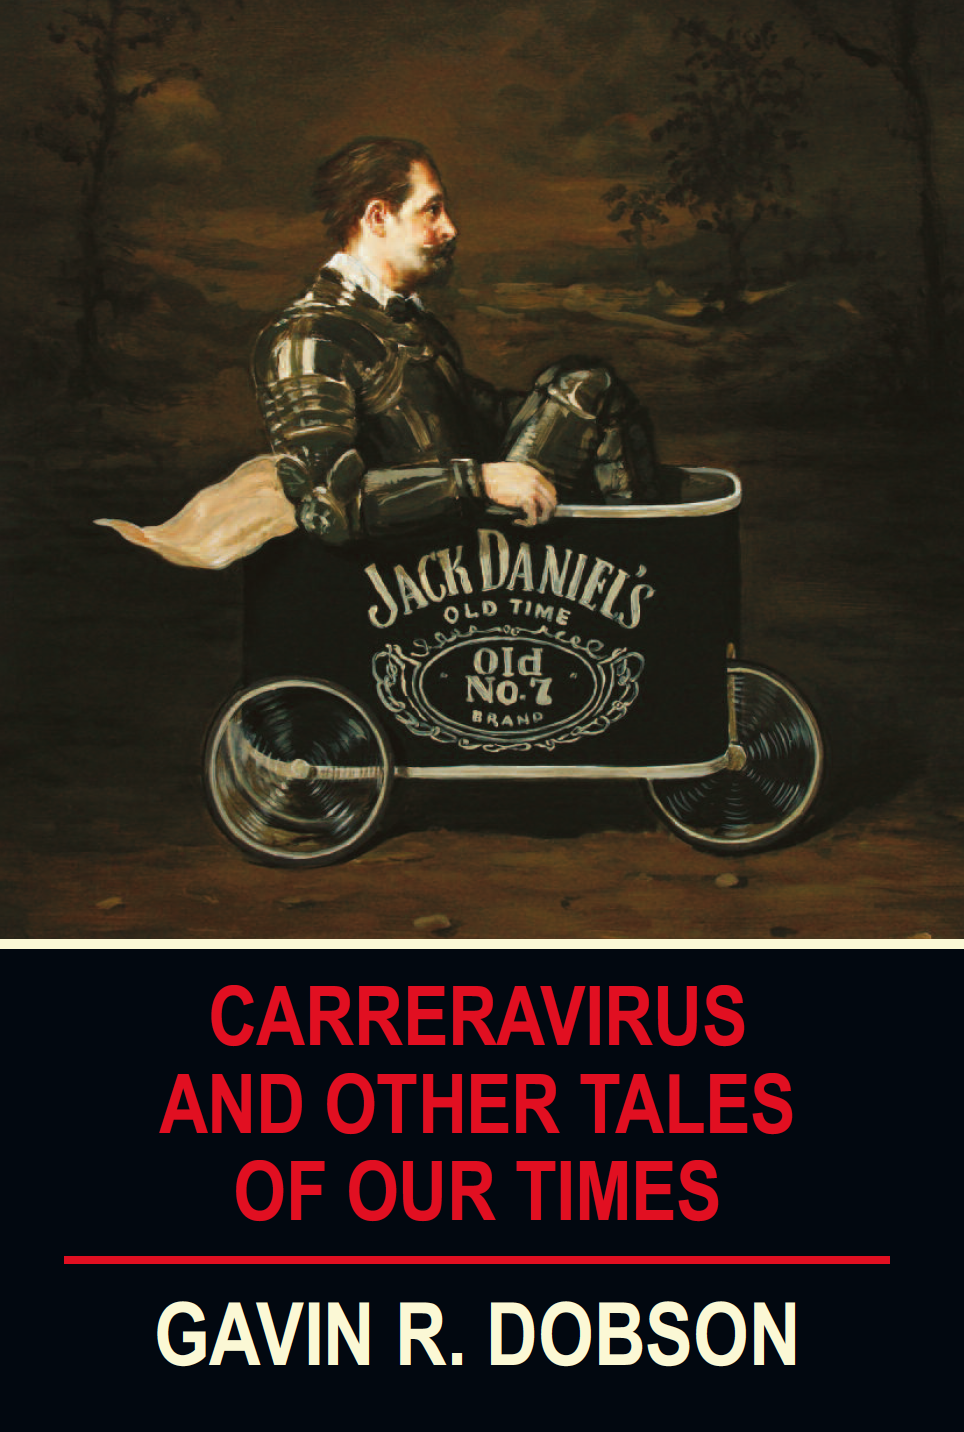 Carreravirus and Other Tales of our Times